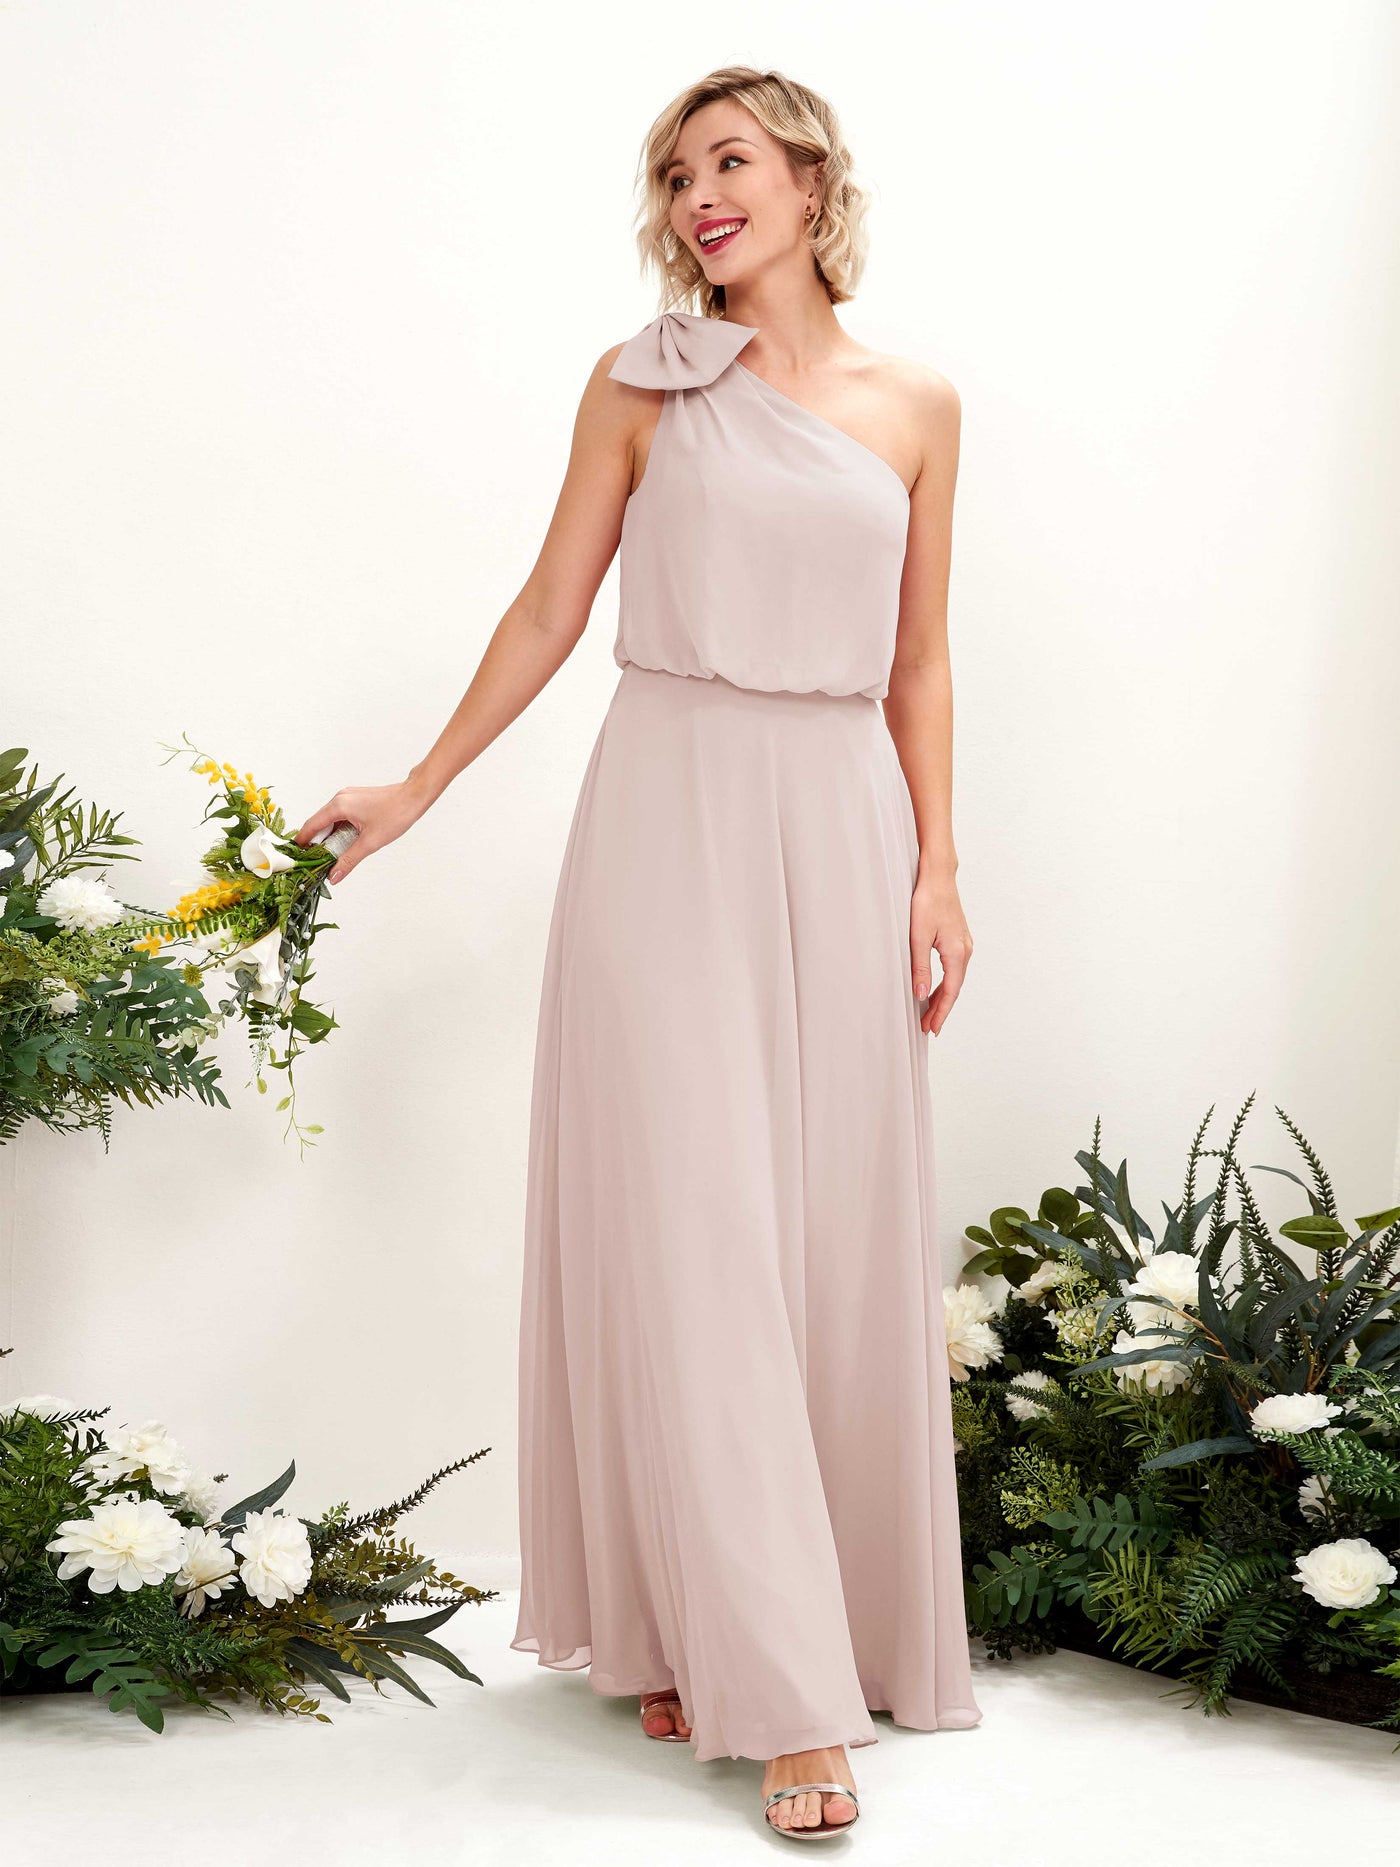 Biscotti Bridesmaid Dresses Bridesmaid Dress A-line Chiffon One Shoulder Full Length Sleeveless Wedding Party Dress (81225535)#color_biscotti